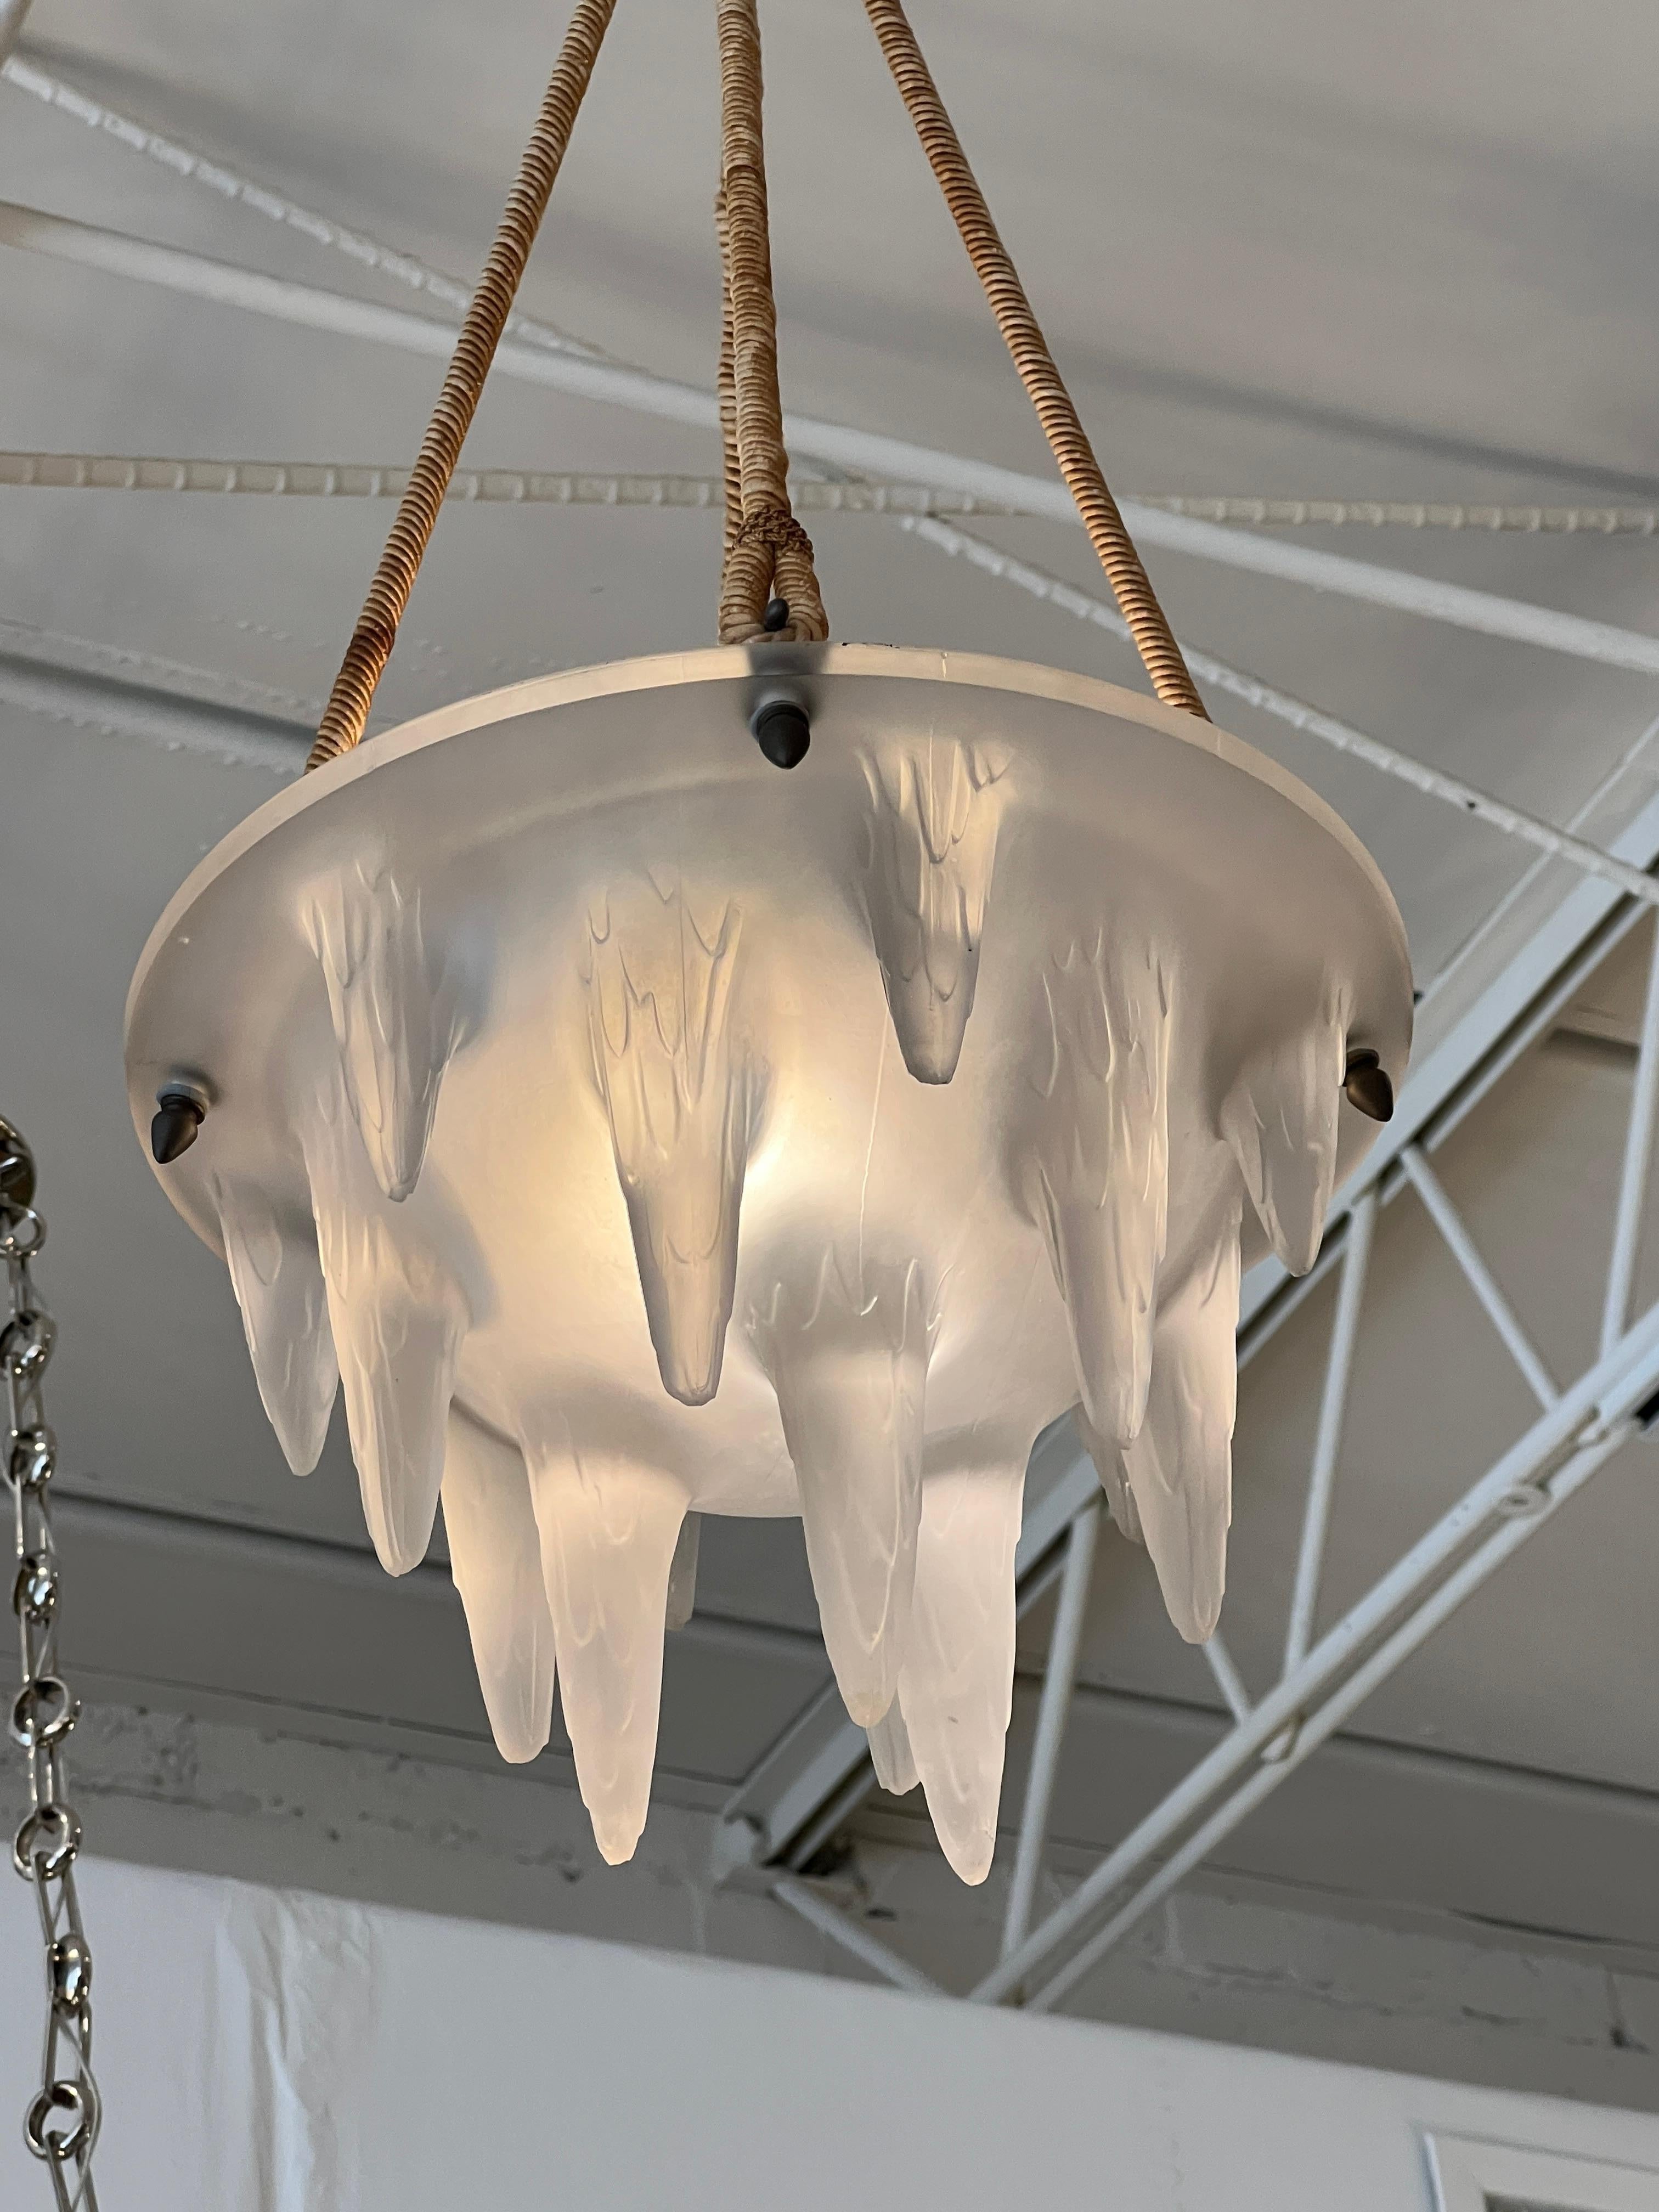 Art Deco molded frosted glass chandelier by Rene Lalique entitled Stalactites. This style was designed in 1912.
Signature: VdA 